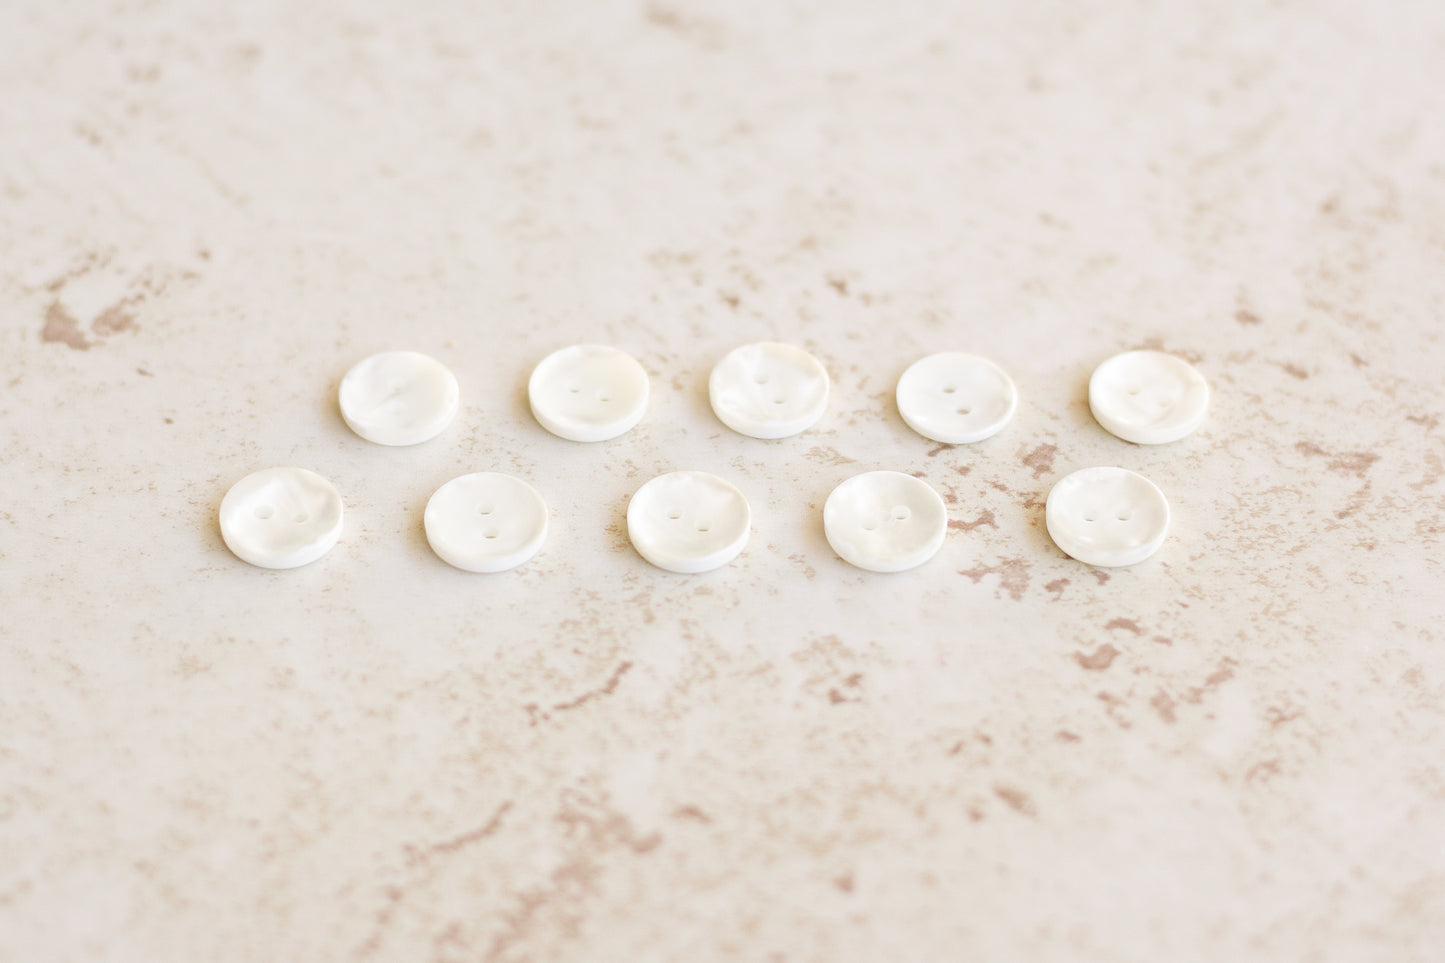 Set of 10 Shirt Buttons - Pearlized White (7/16"/13mm)